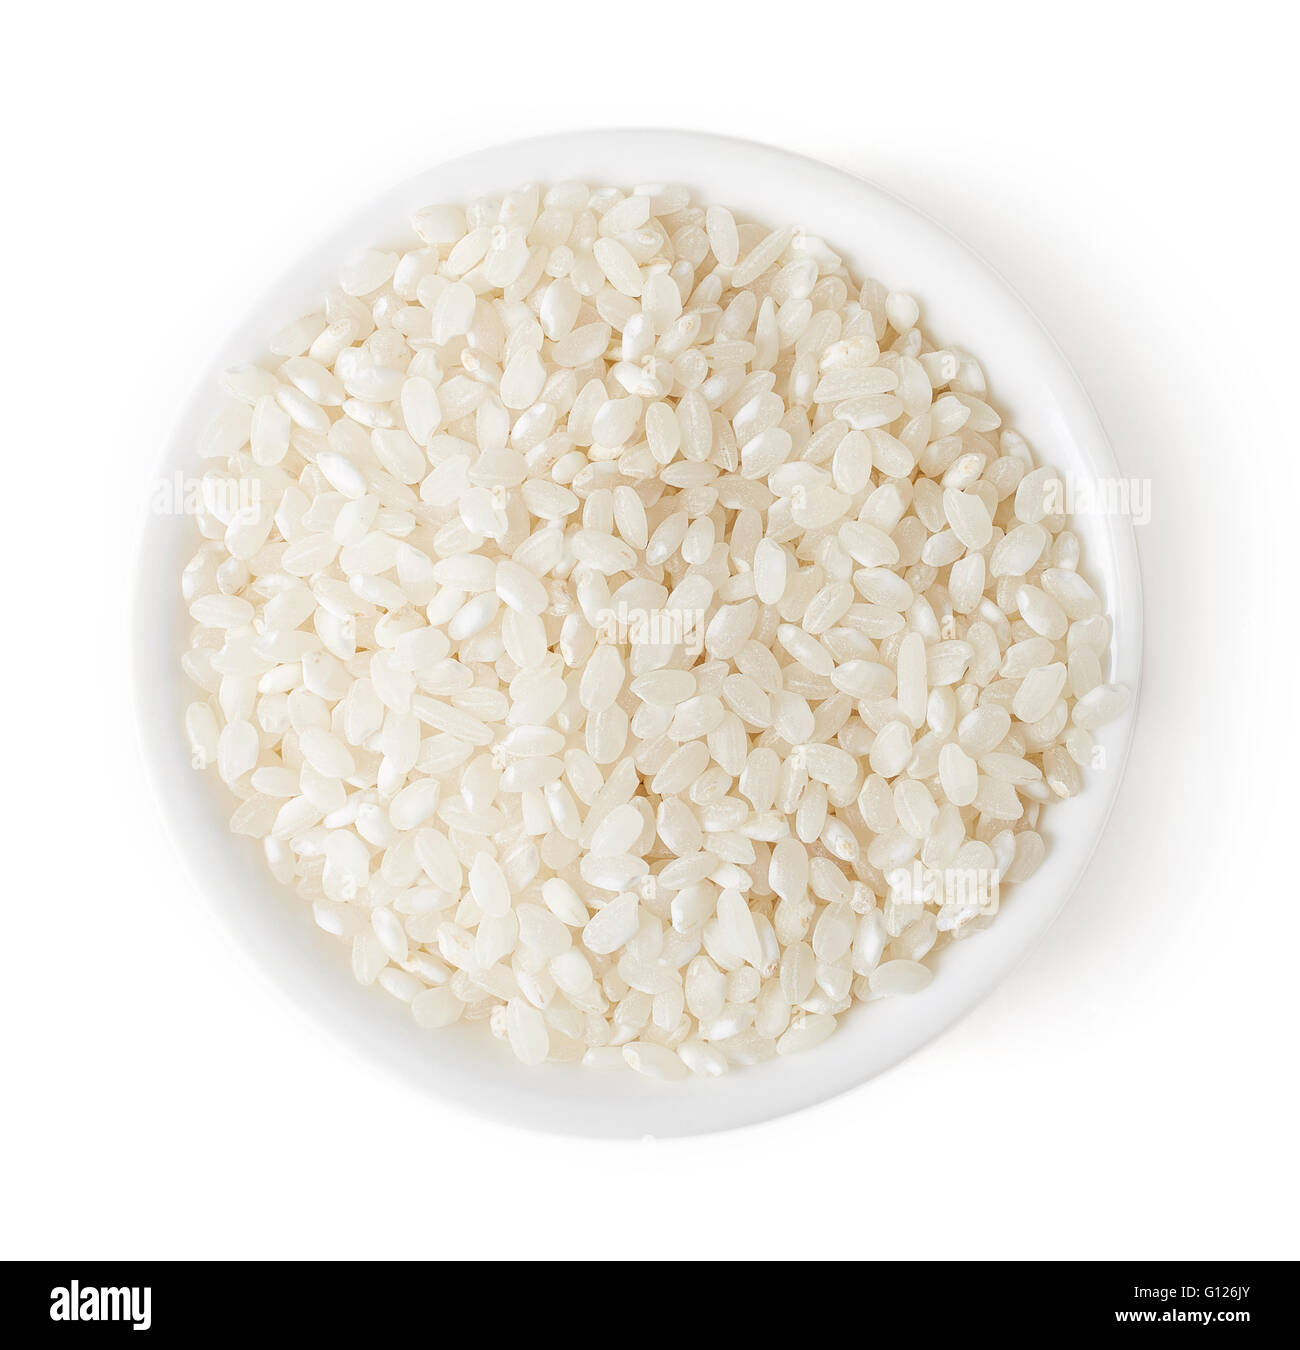 Bowl of white rice grains isolated on white background, top view Stock Photo